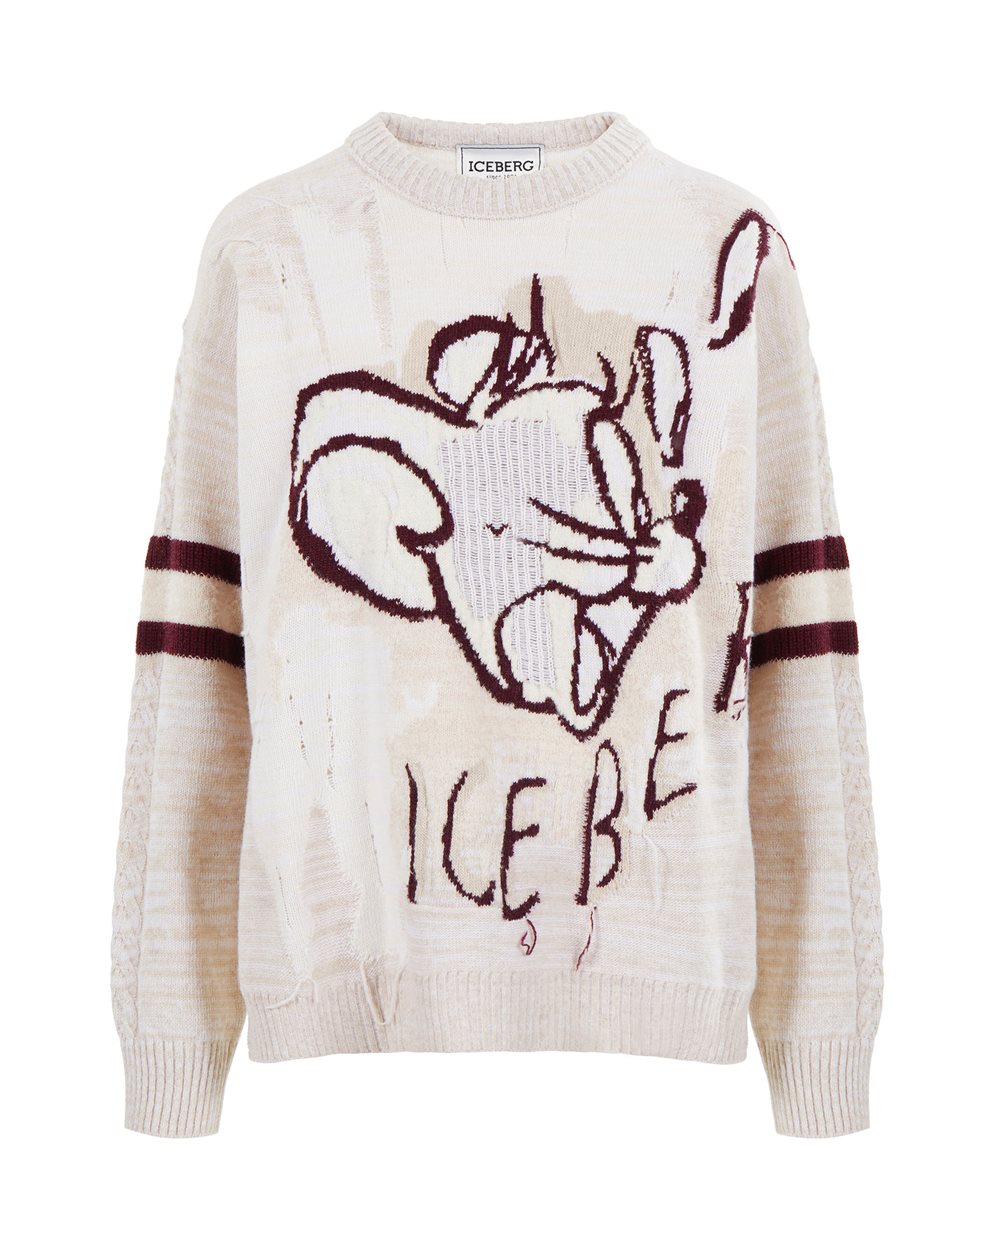 Sweater with cartoon detail - per abilitare | Iceberg - Official Website